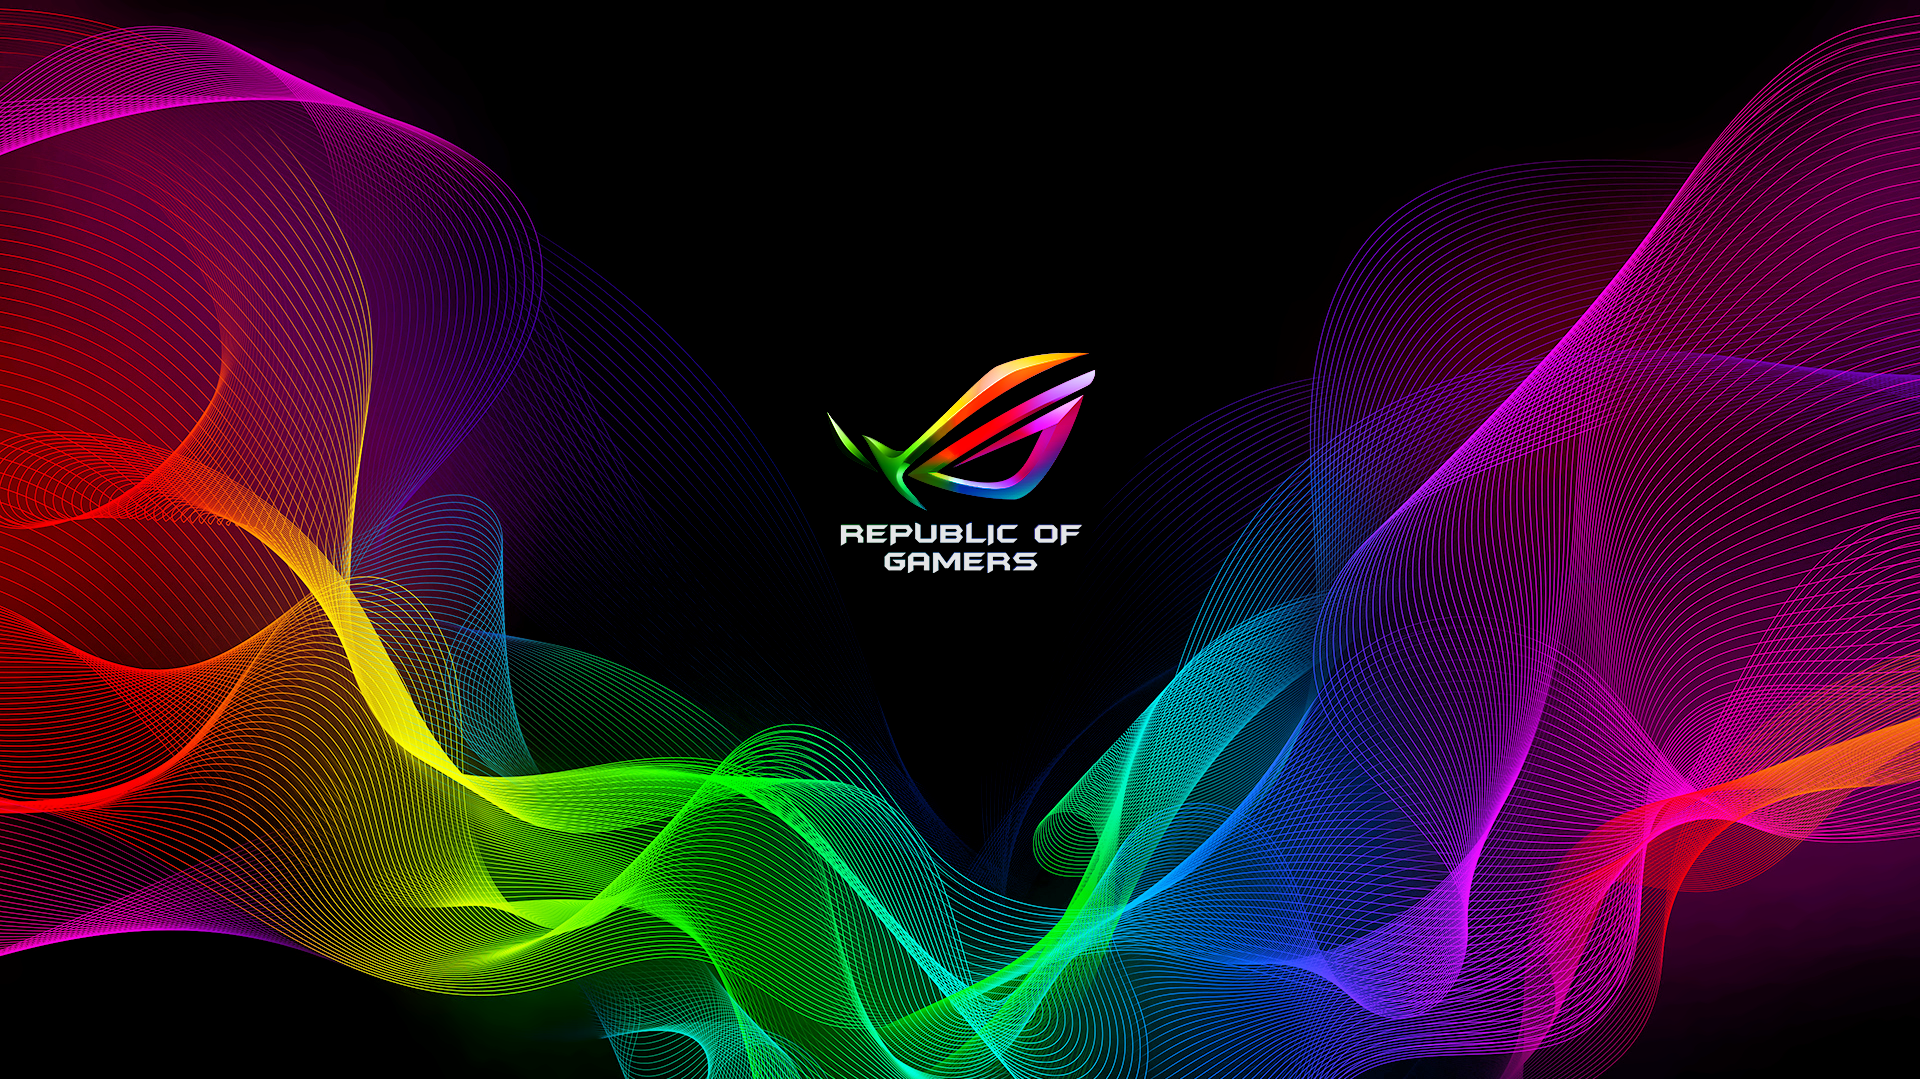 Rgb Rog Wallpaper Based On The One From Razer Investified Is A